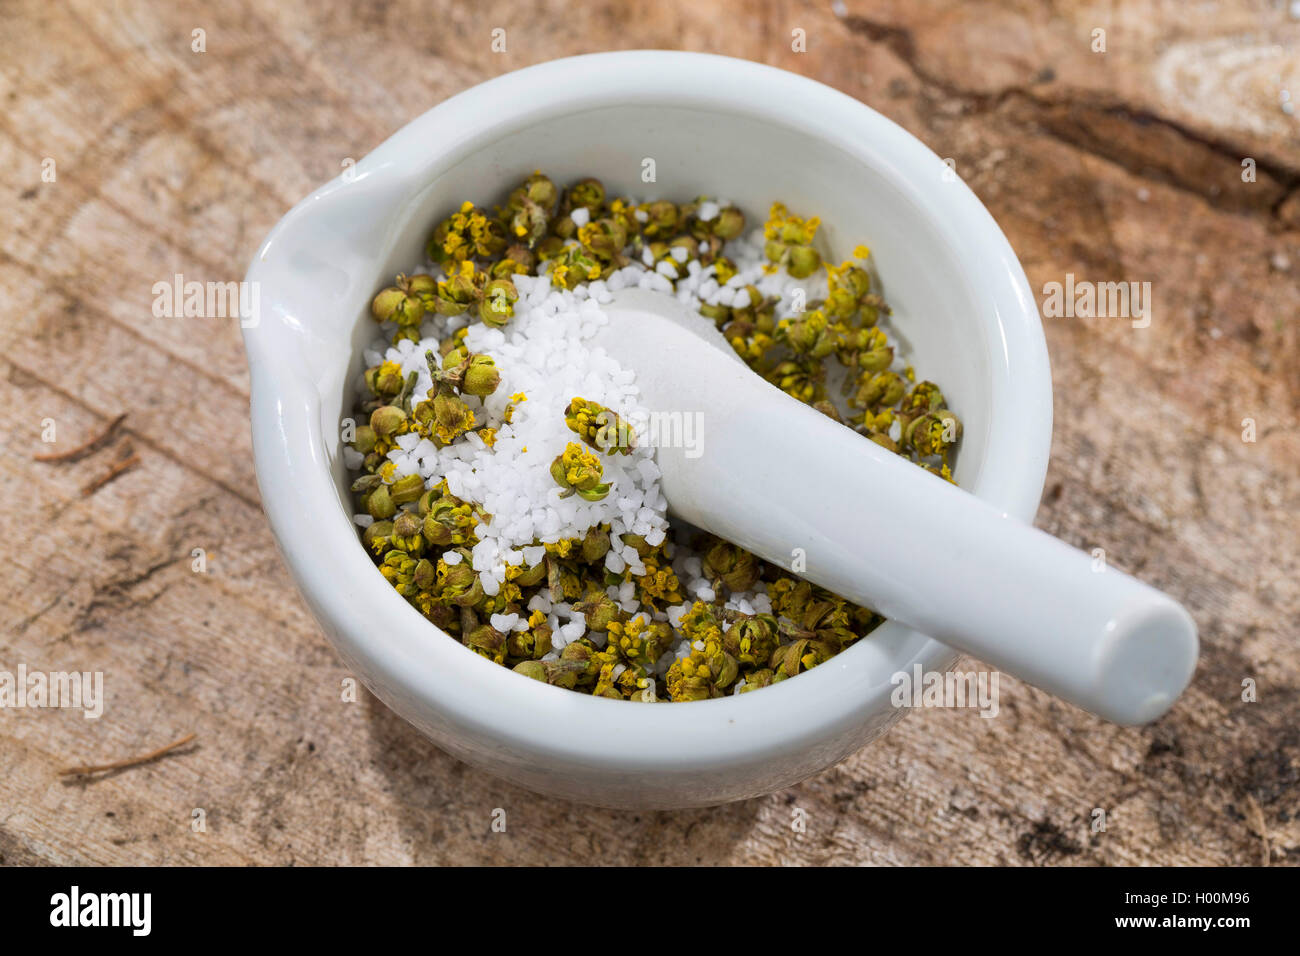 cornelian cherry wood (Cornus mas), collected flowers are dried and mixed with salt Stock Photo